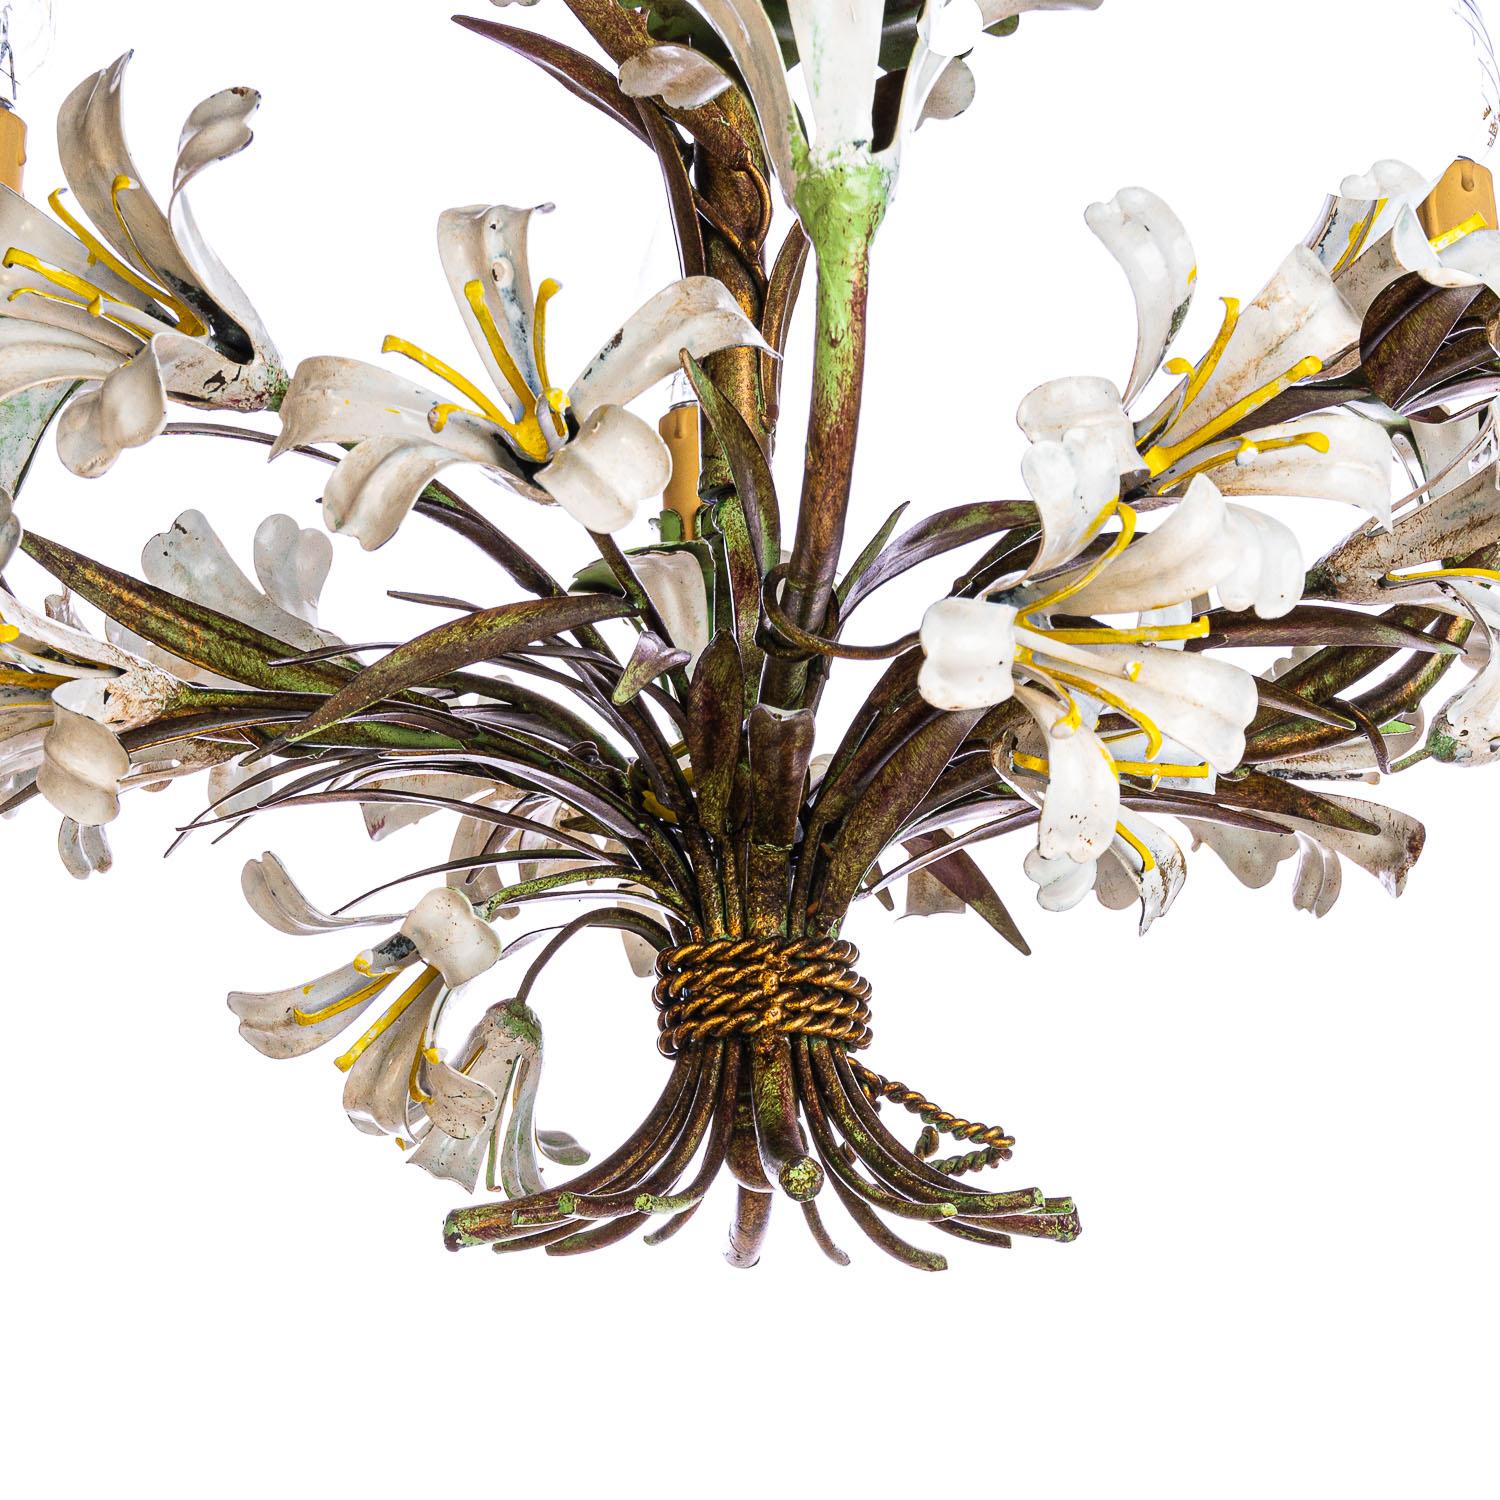 Stunning 4 light fixture with painted Lily's white and yellow polychromed metal Toleware. Gorgeous faux wax candlestick light holders on a green holder mounted on a white lily. Gold and green color through out the base. 
We have a short extra chain